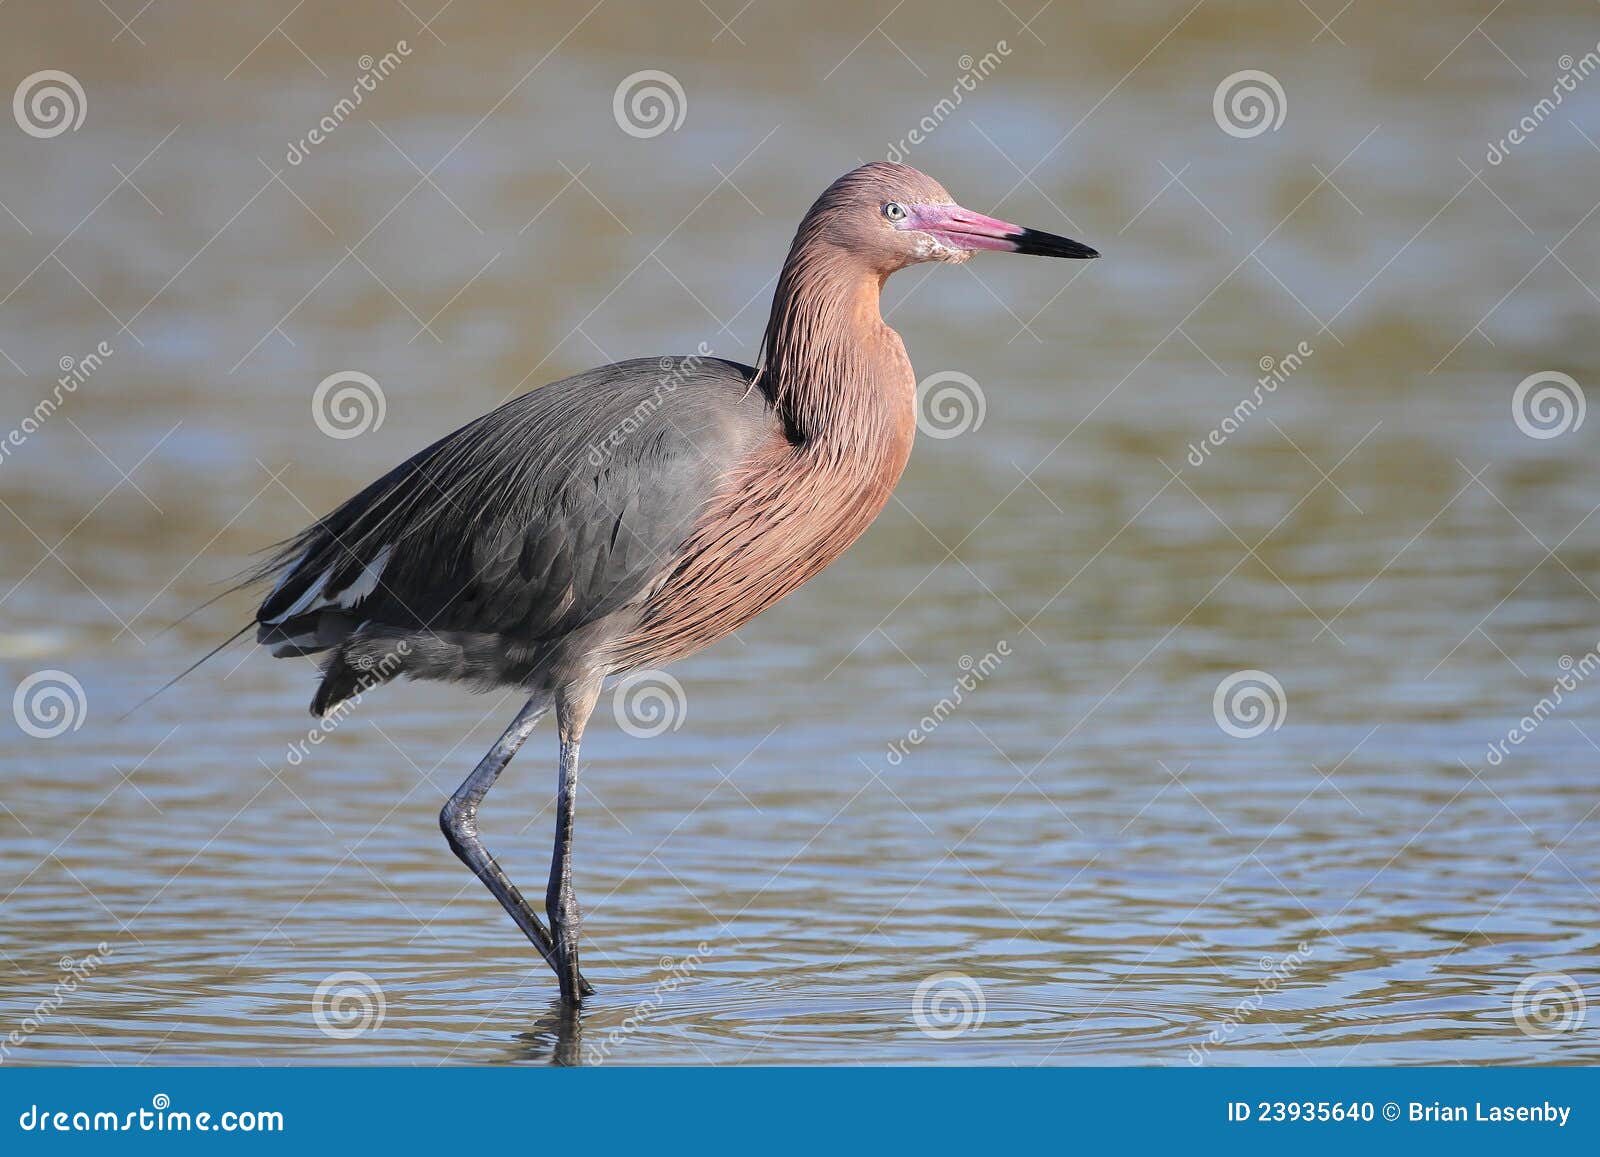 reddish egret wading in shallow water